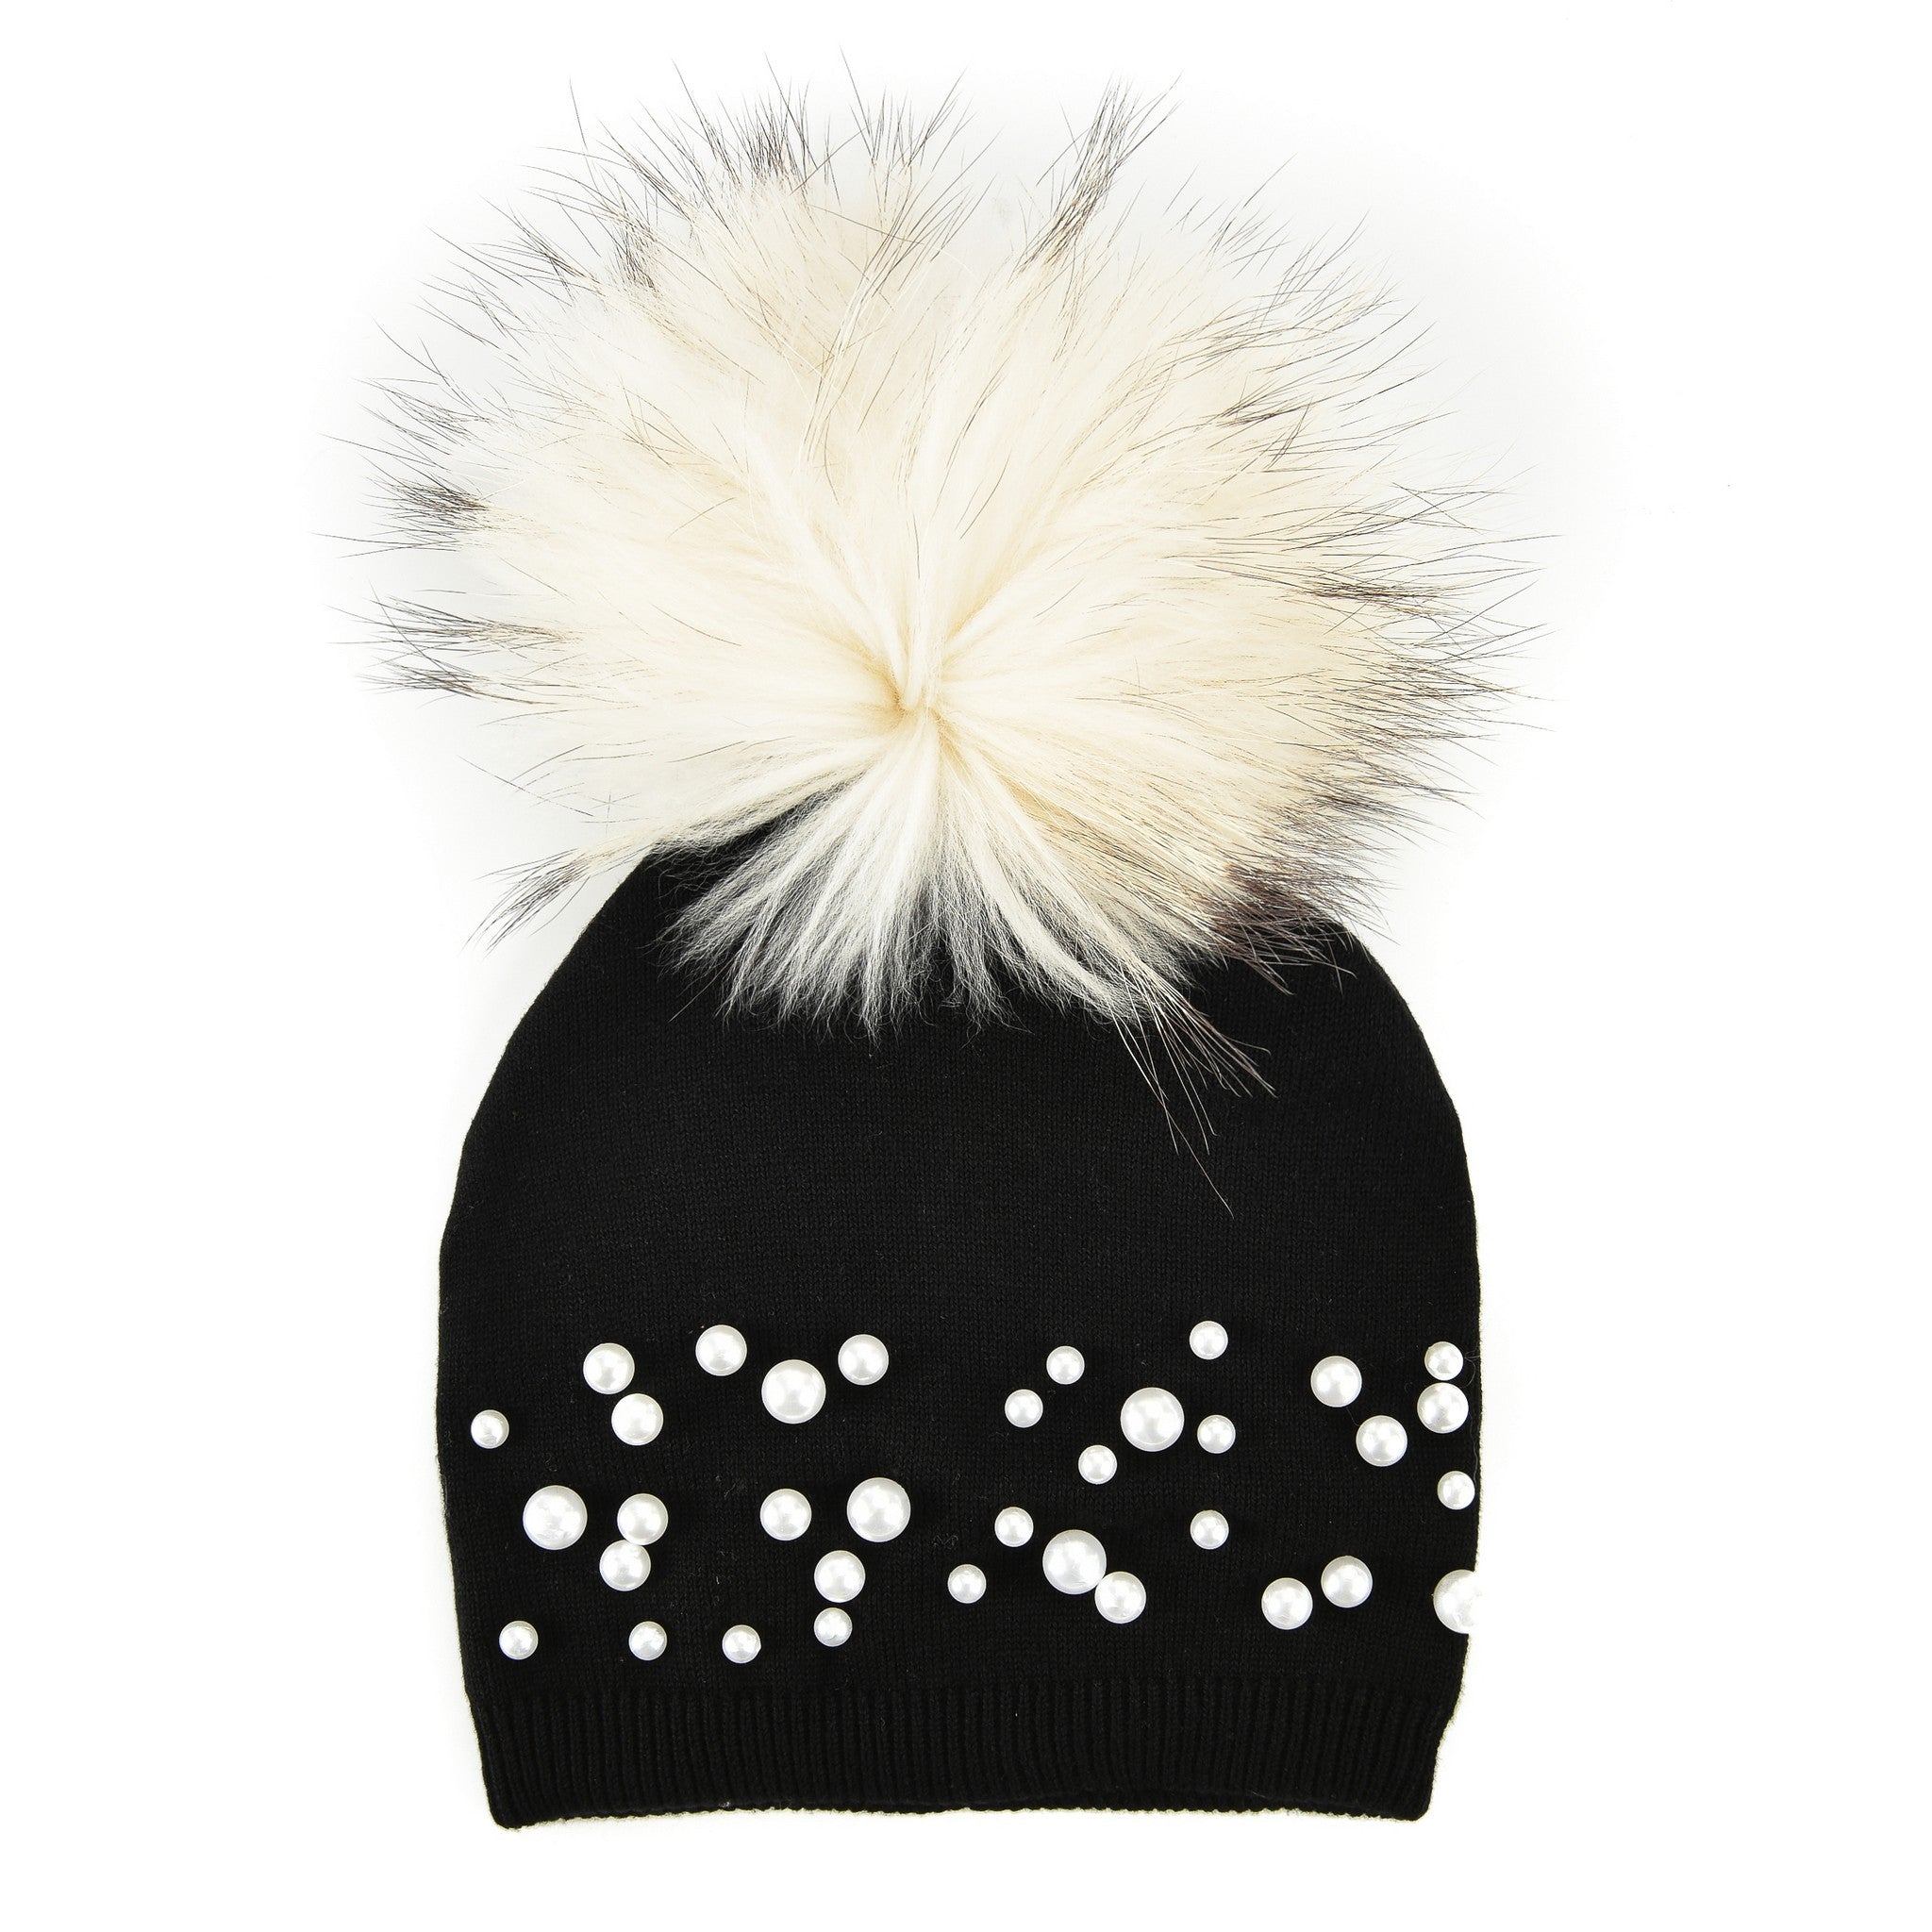 Knit Hat With Pearls - Kidichic